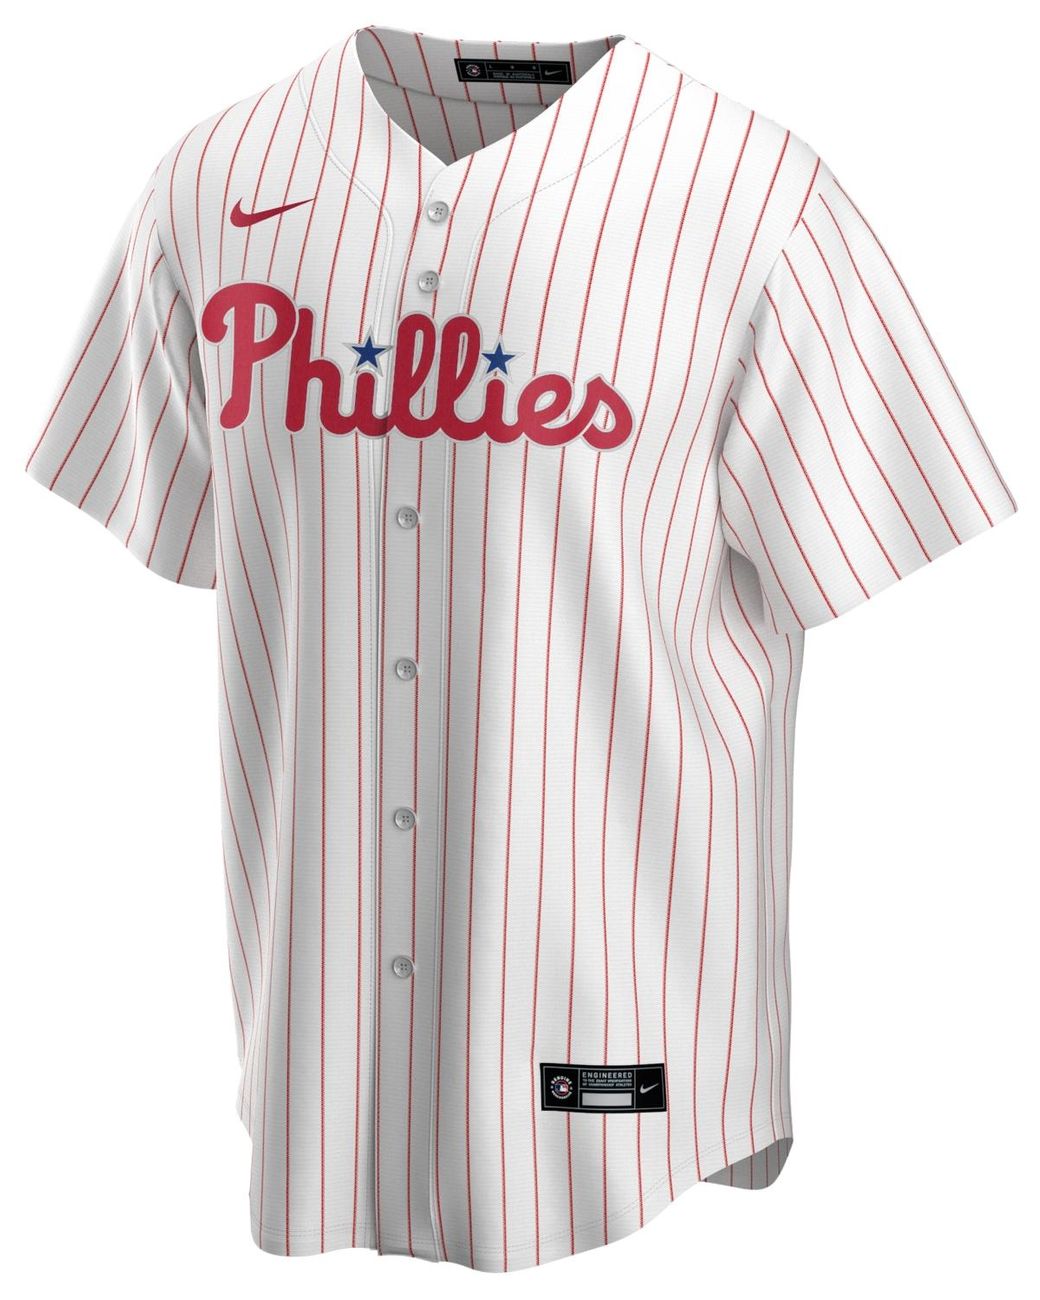 phillies game jersey